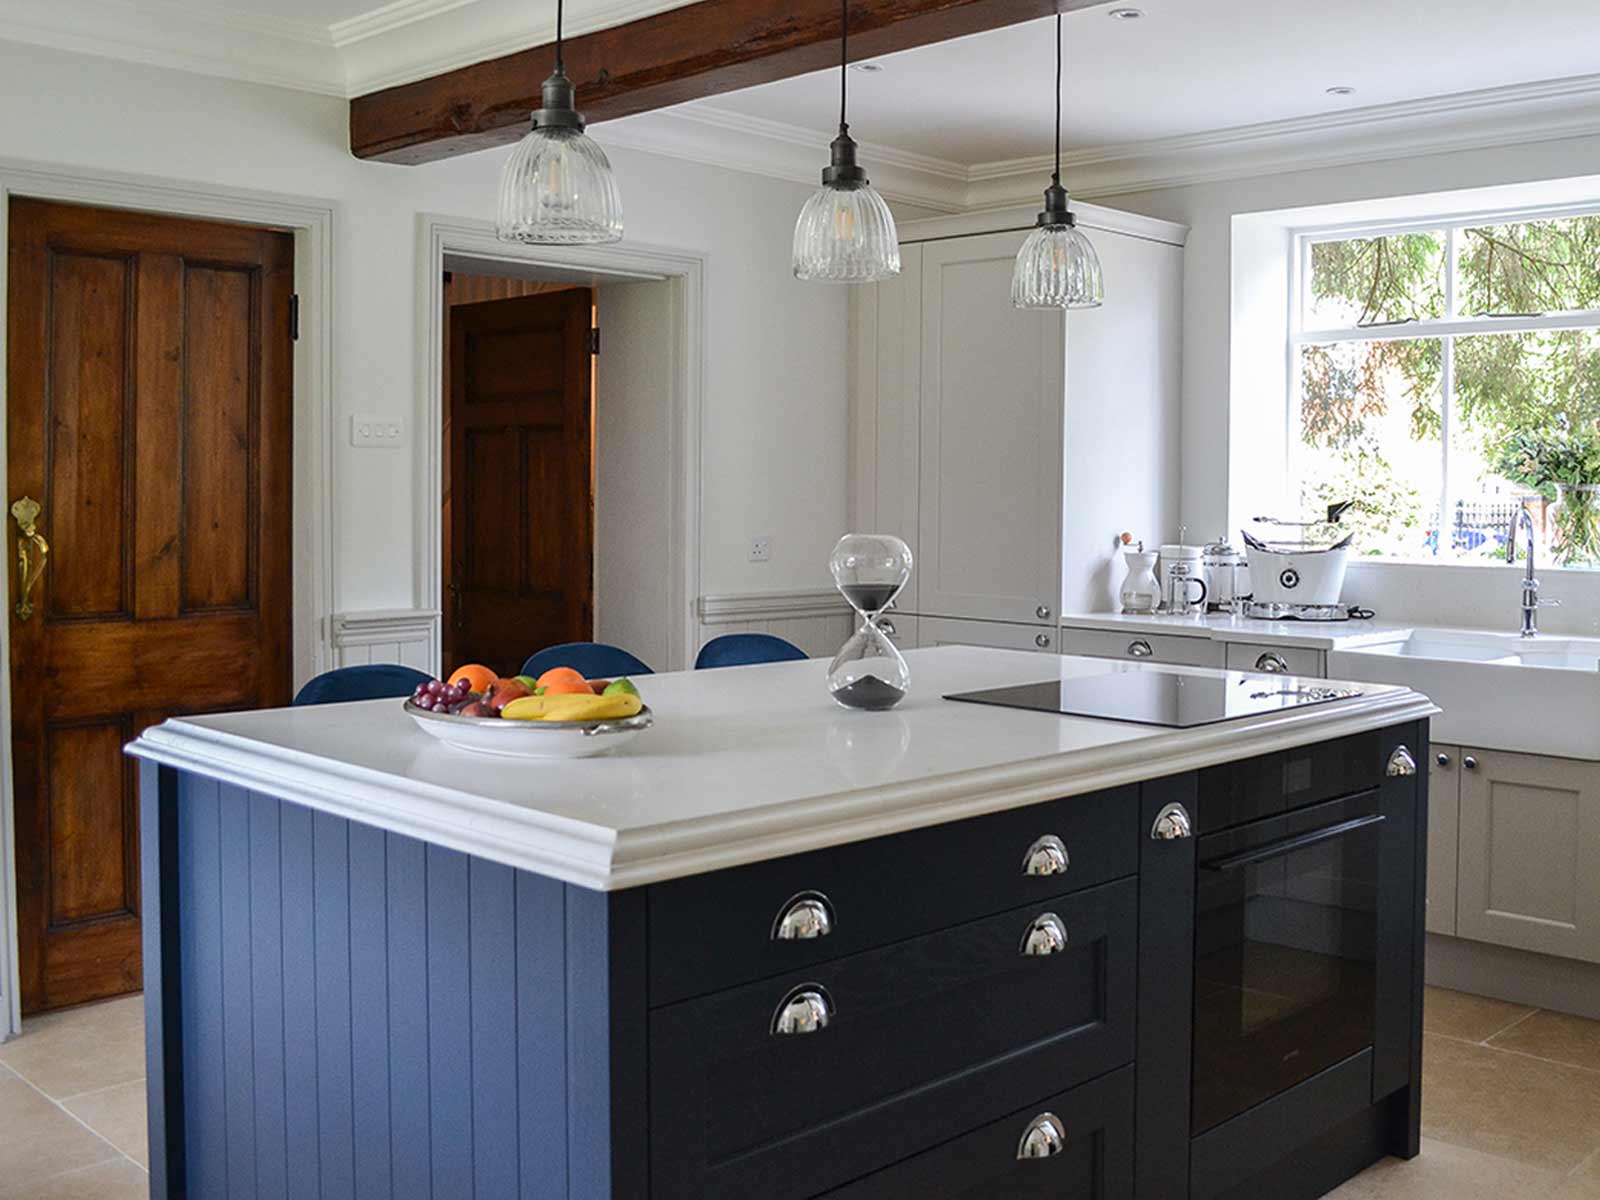 A navy kitchen island with white marble worktops